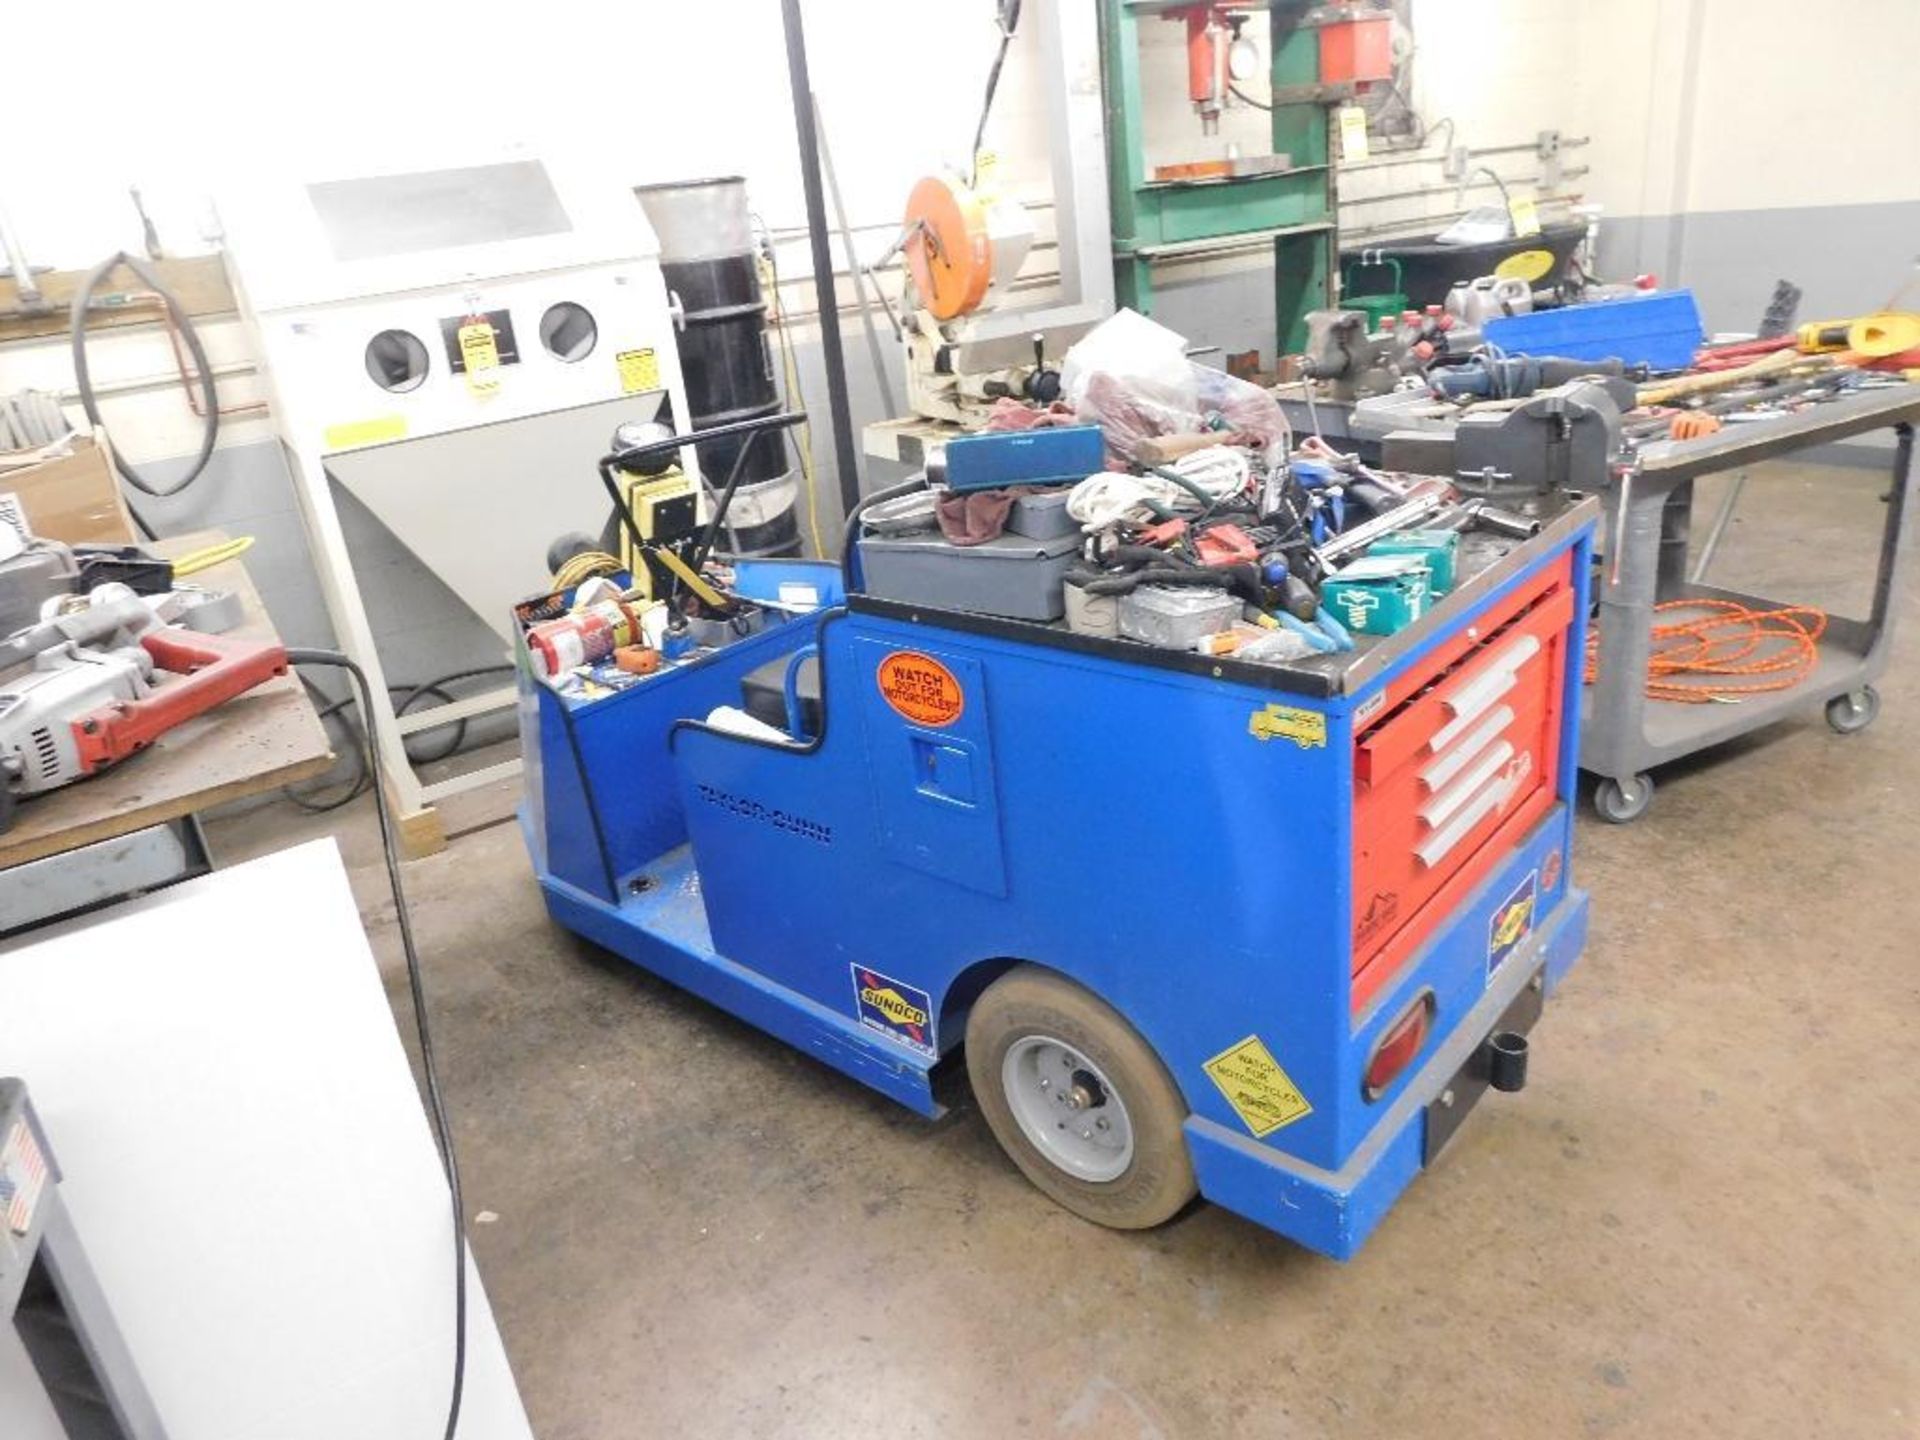 TAYLOR DUNN MX 600 ELECTRIC MAINTENANCE CART W/ 4 IN. WILTON BENCH VISE, 5-DRAWER KENNEDY TOOL BOX, - Image 3 of 3